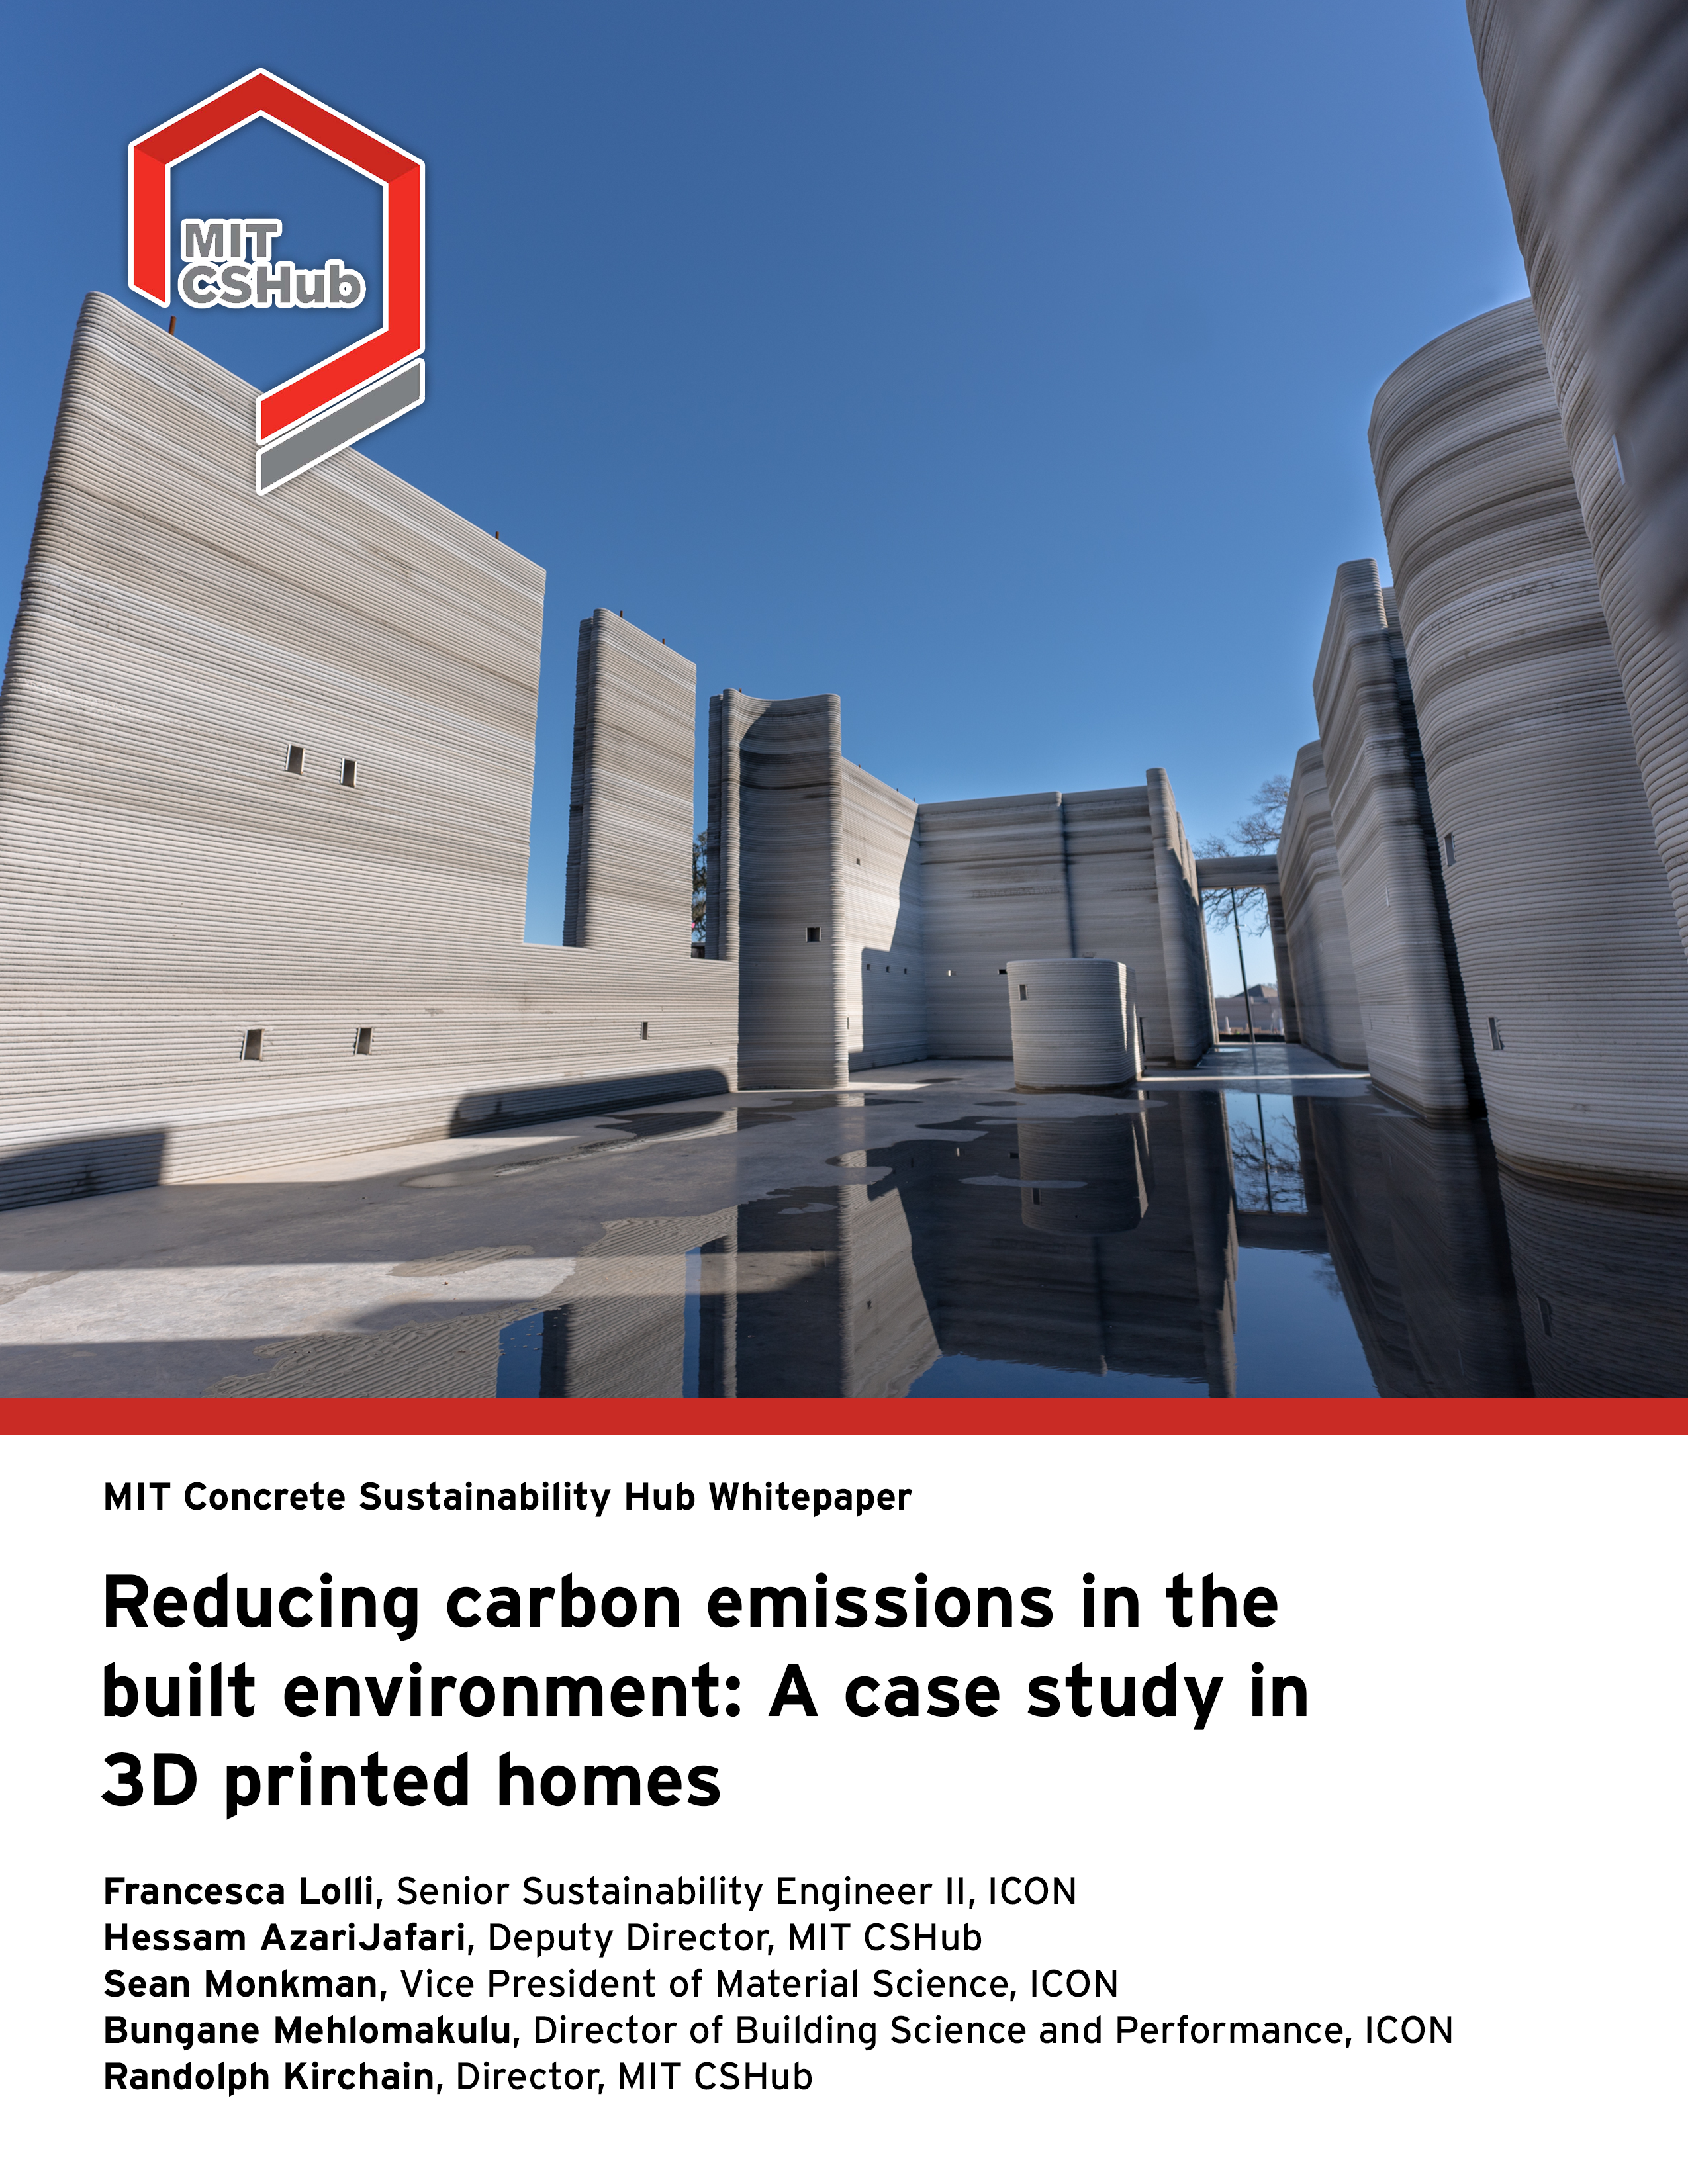 Whitepaper: Reducing Carbon Emissions in the Built Environment: A Case Study in 3D Printed Homes